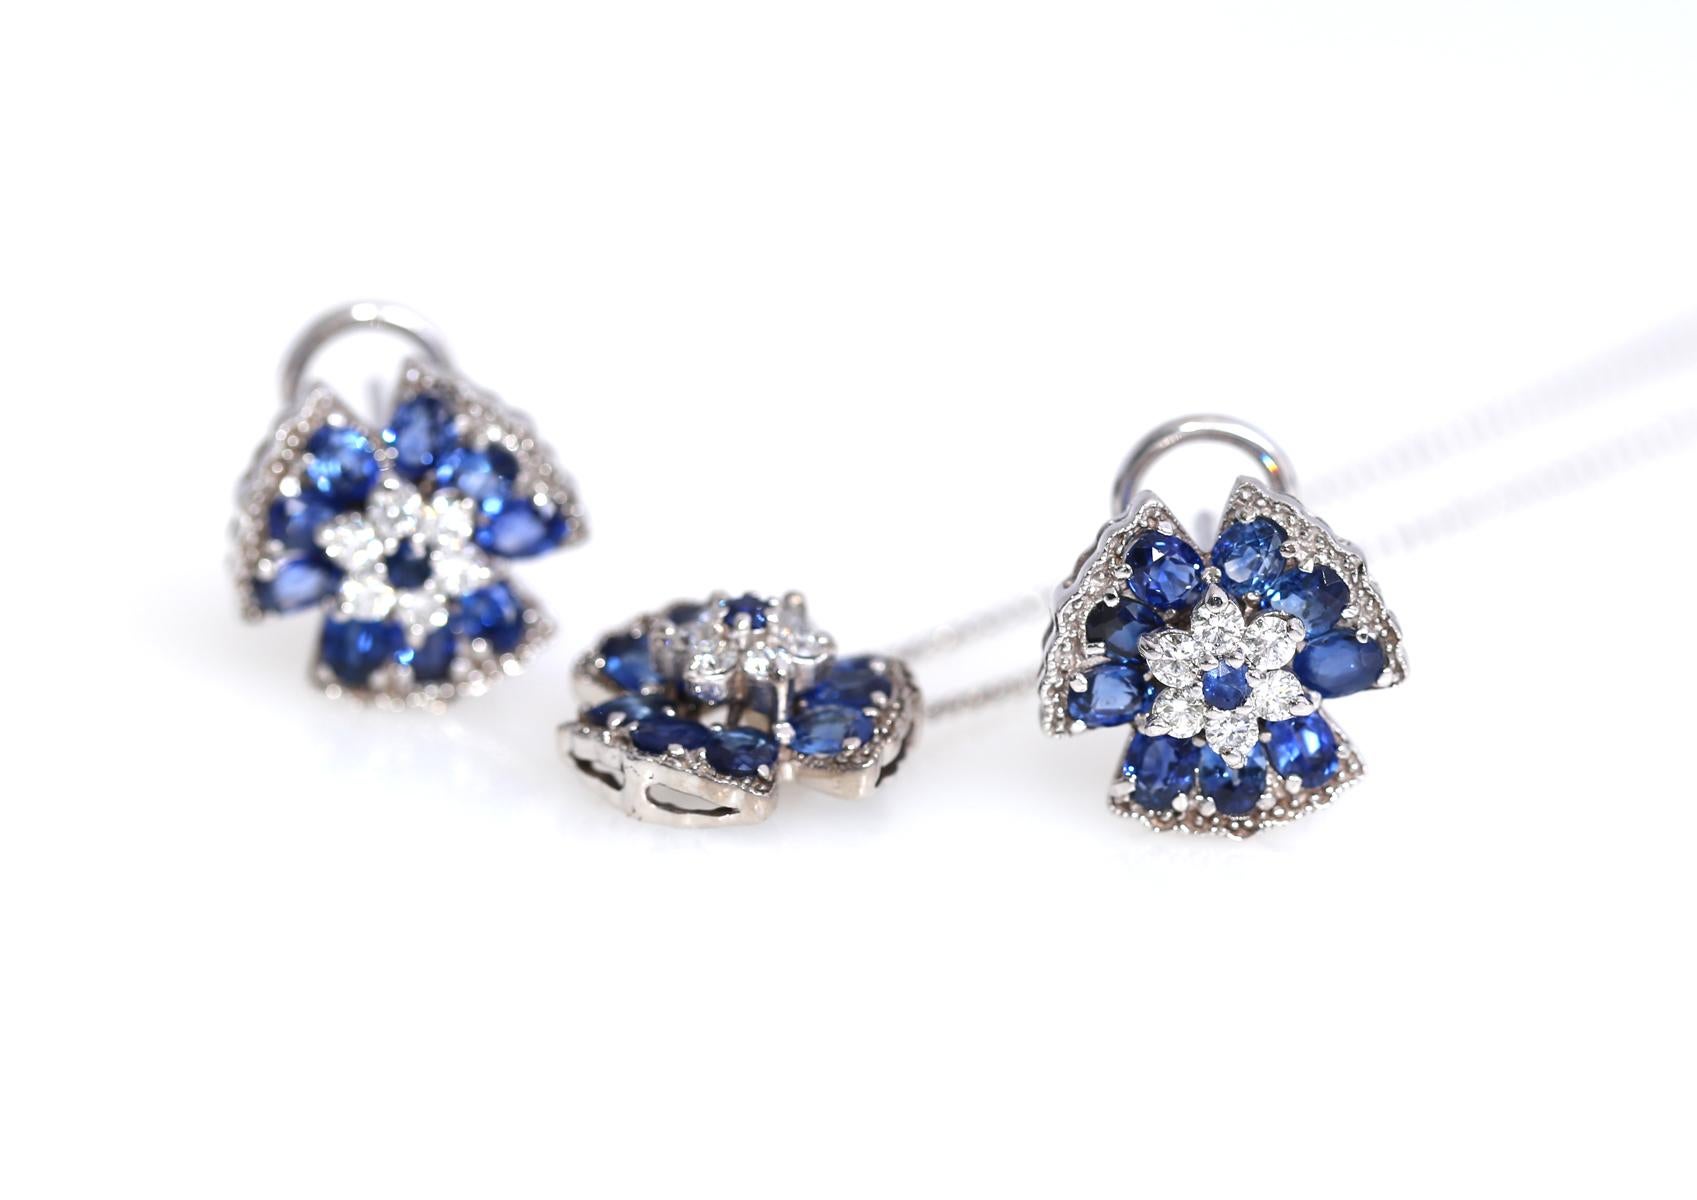 Modern stylish and delicate Sapphire Diamonds Pendant and Earrings Set. Depicting a sophisticated flower ornament, the design matches in earrings and a pendant. White Gold 14 Karat, fine Sapphires are used to underline the beautiful Diamonds.